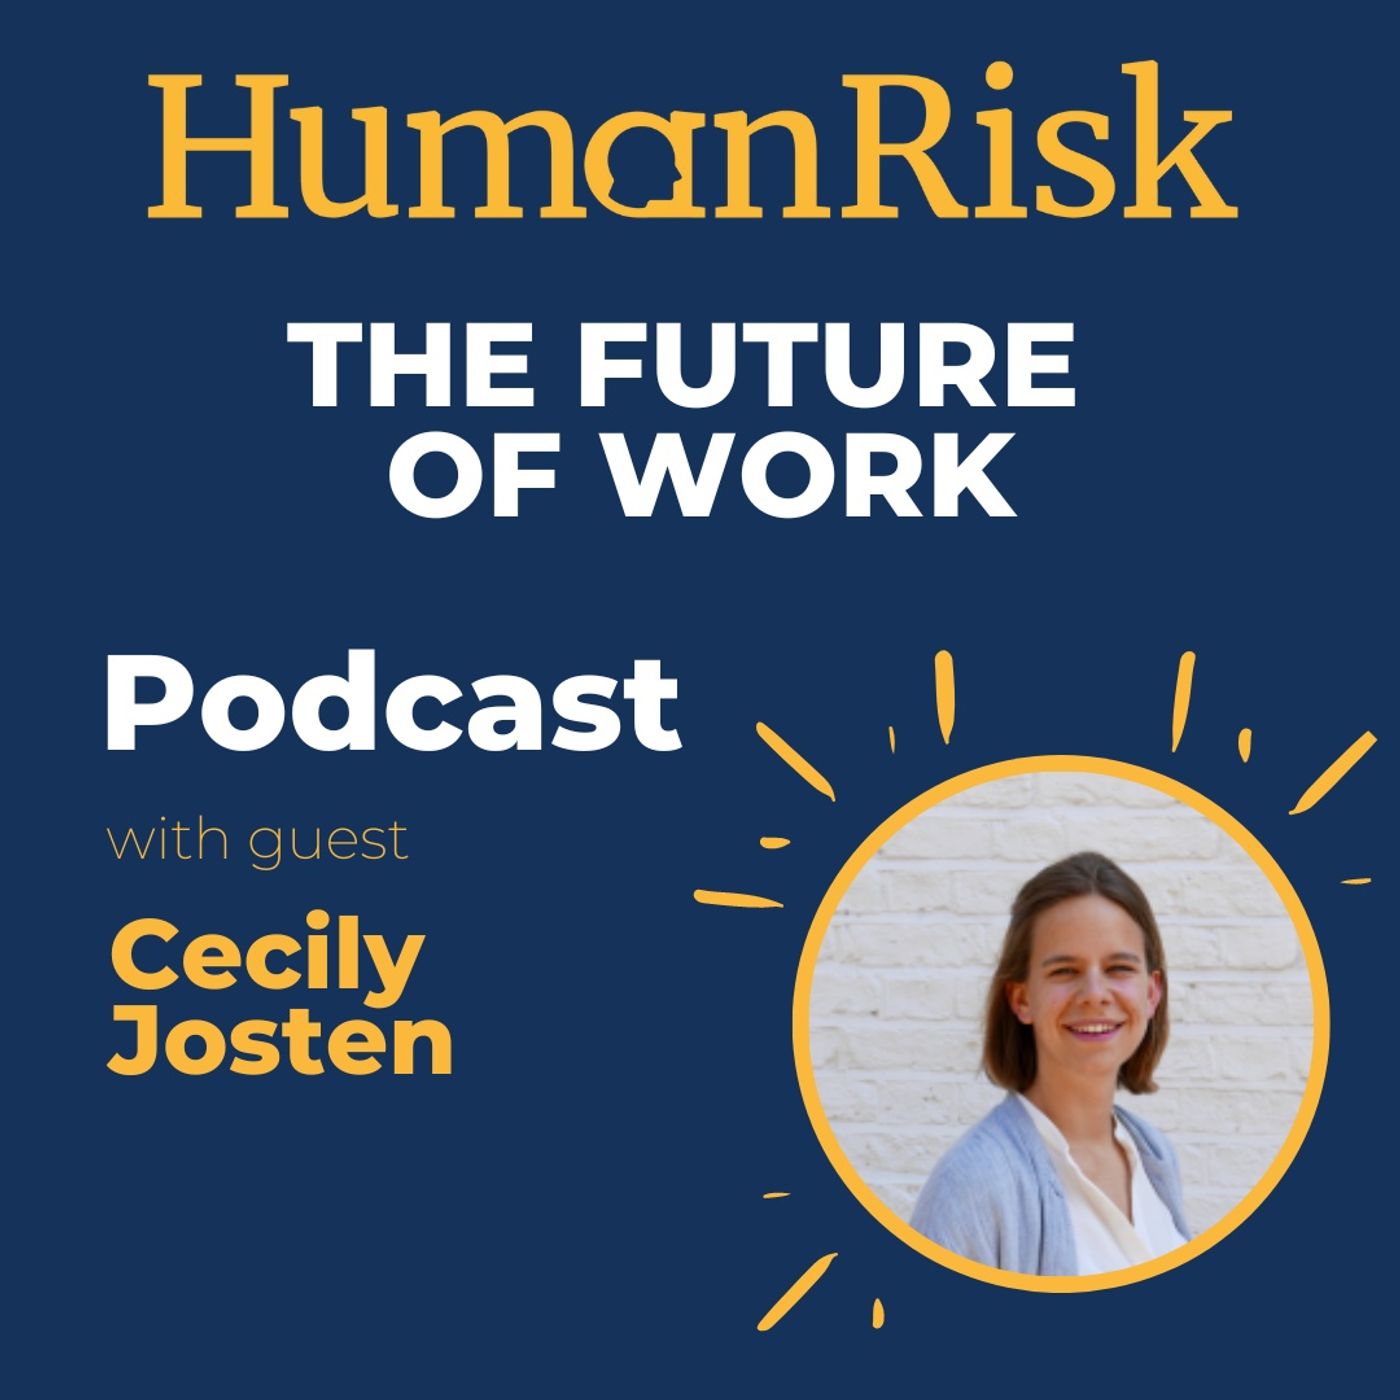 Cecily Josten on The Future of Work Image